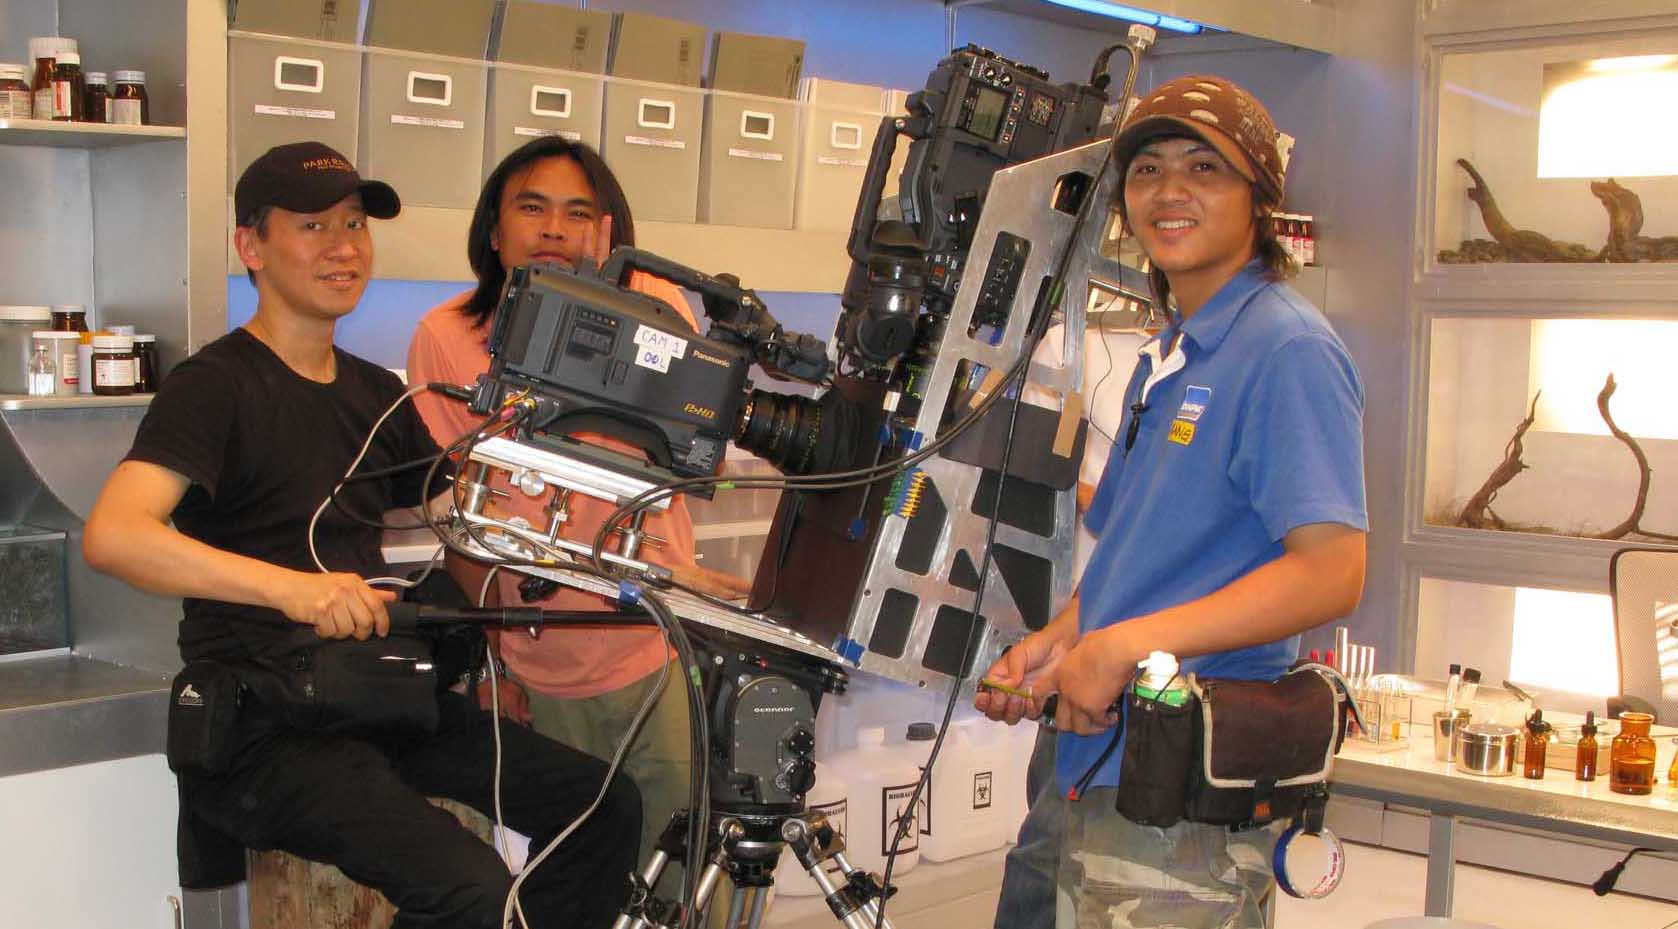 Henry Chung shooting with his new 3D rig with Panasonic HVX3000 cameras.